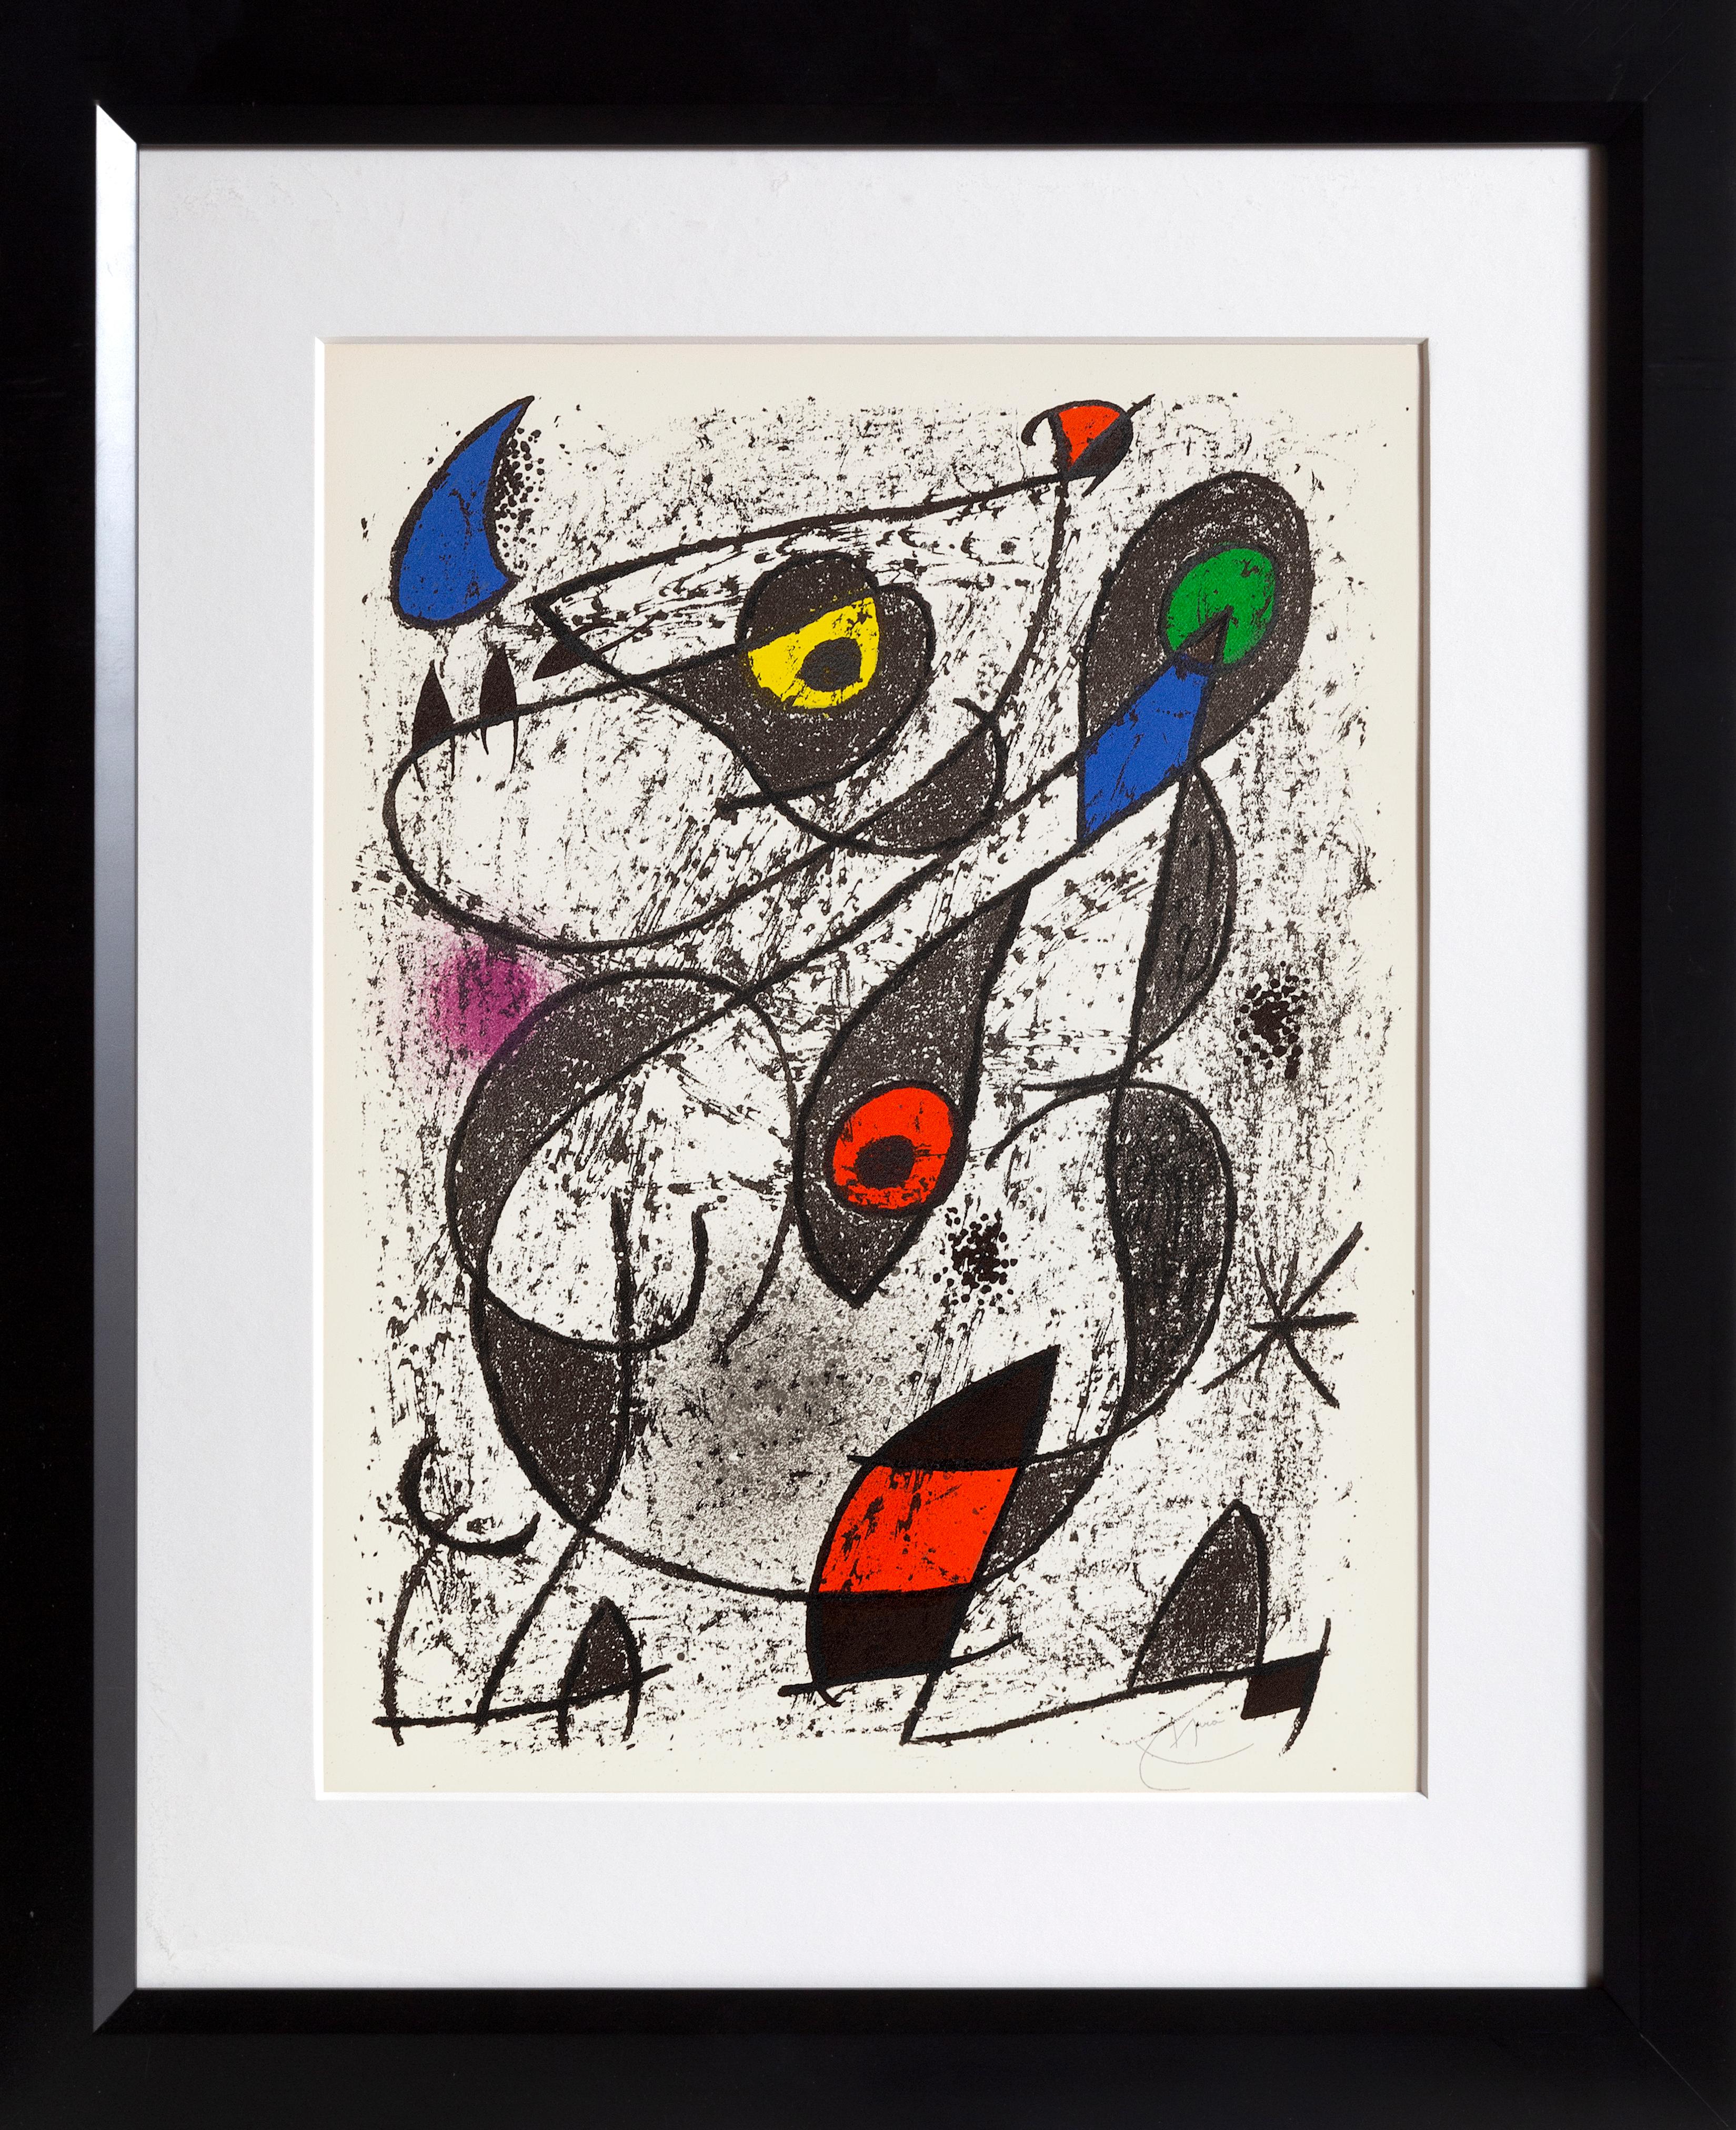 Joan Miró Abstract Print - Miro a l'Encre II, Lithograph on Wove Paper from the Indelible Miro